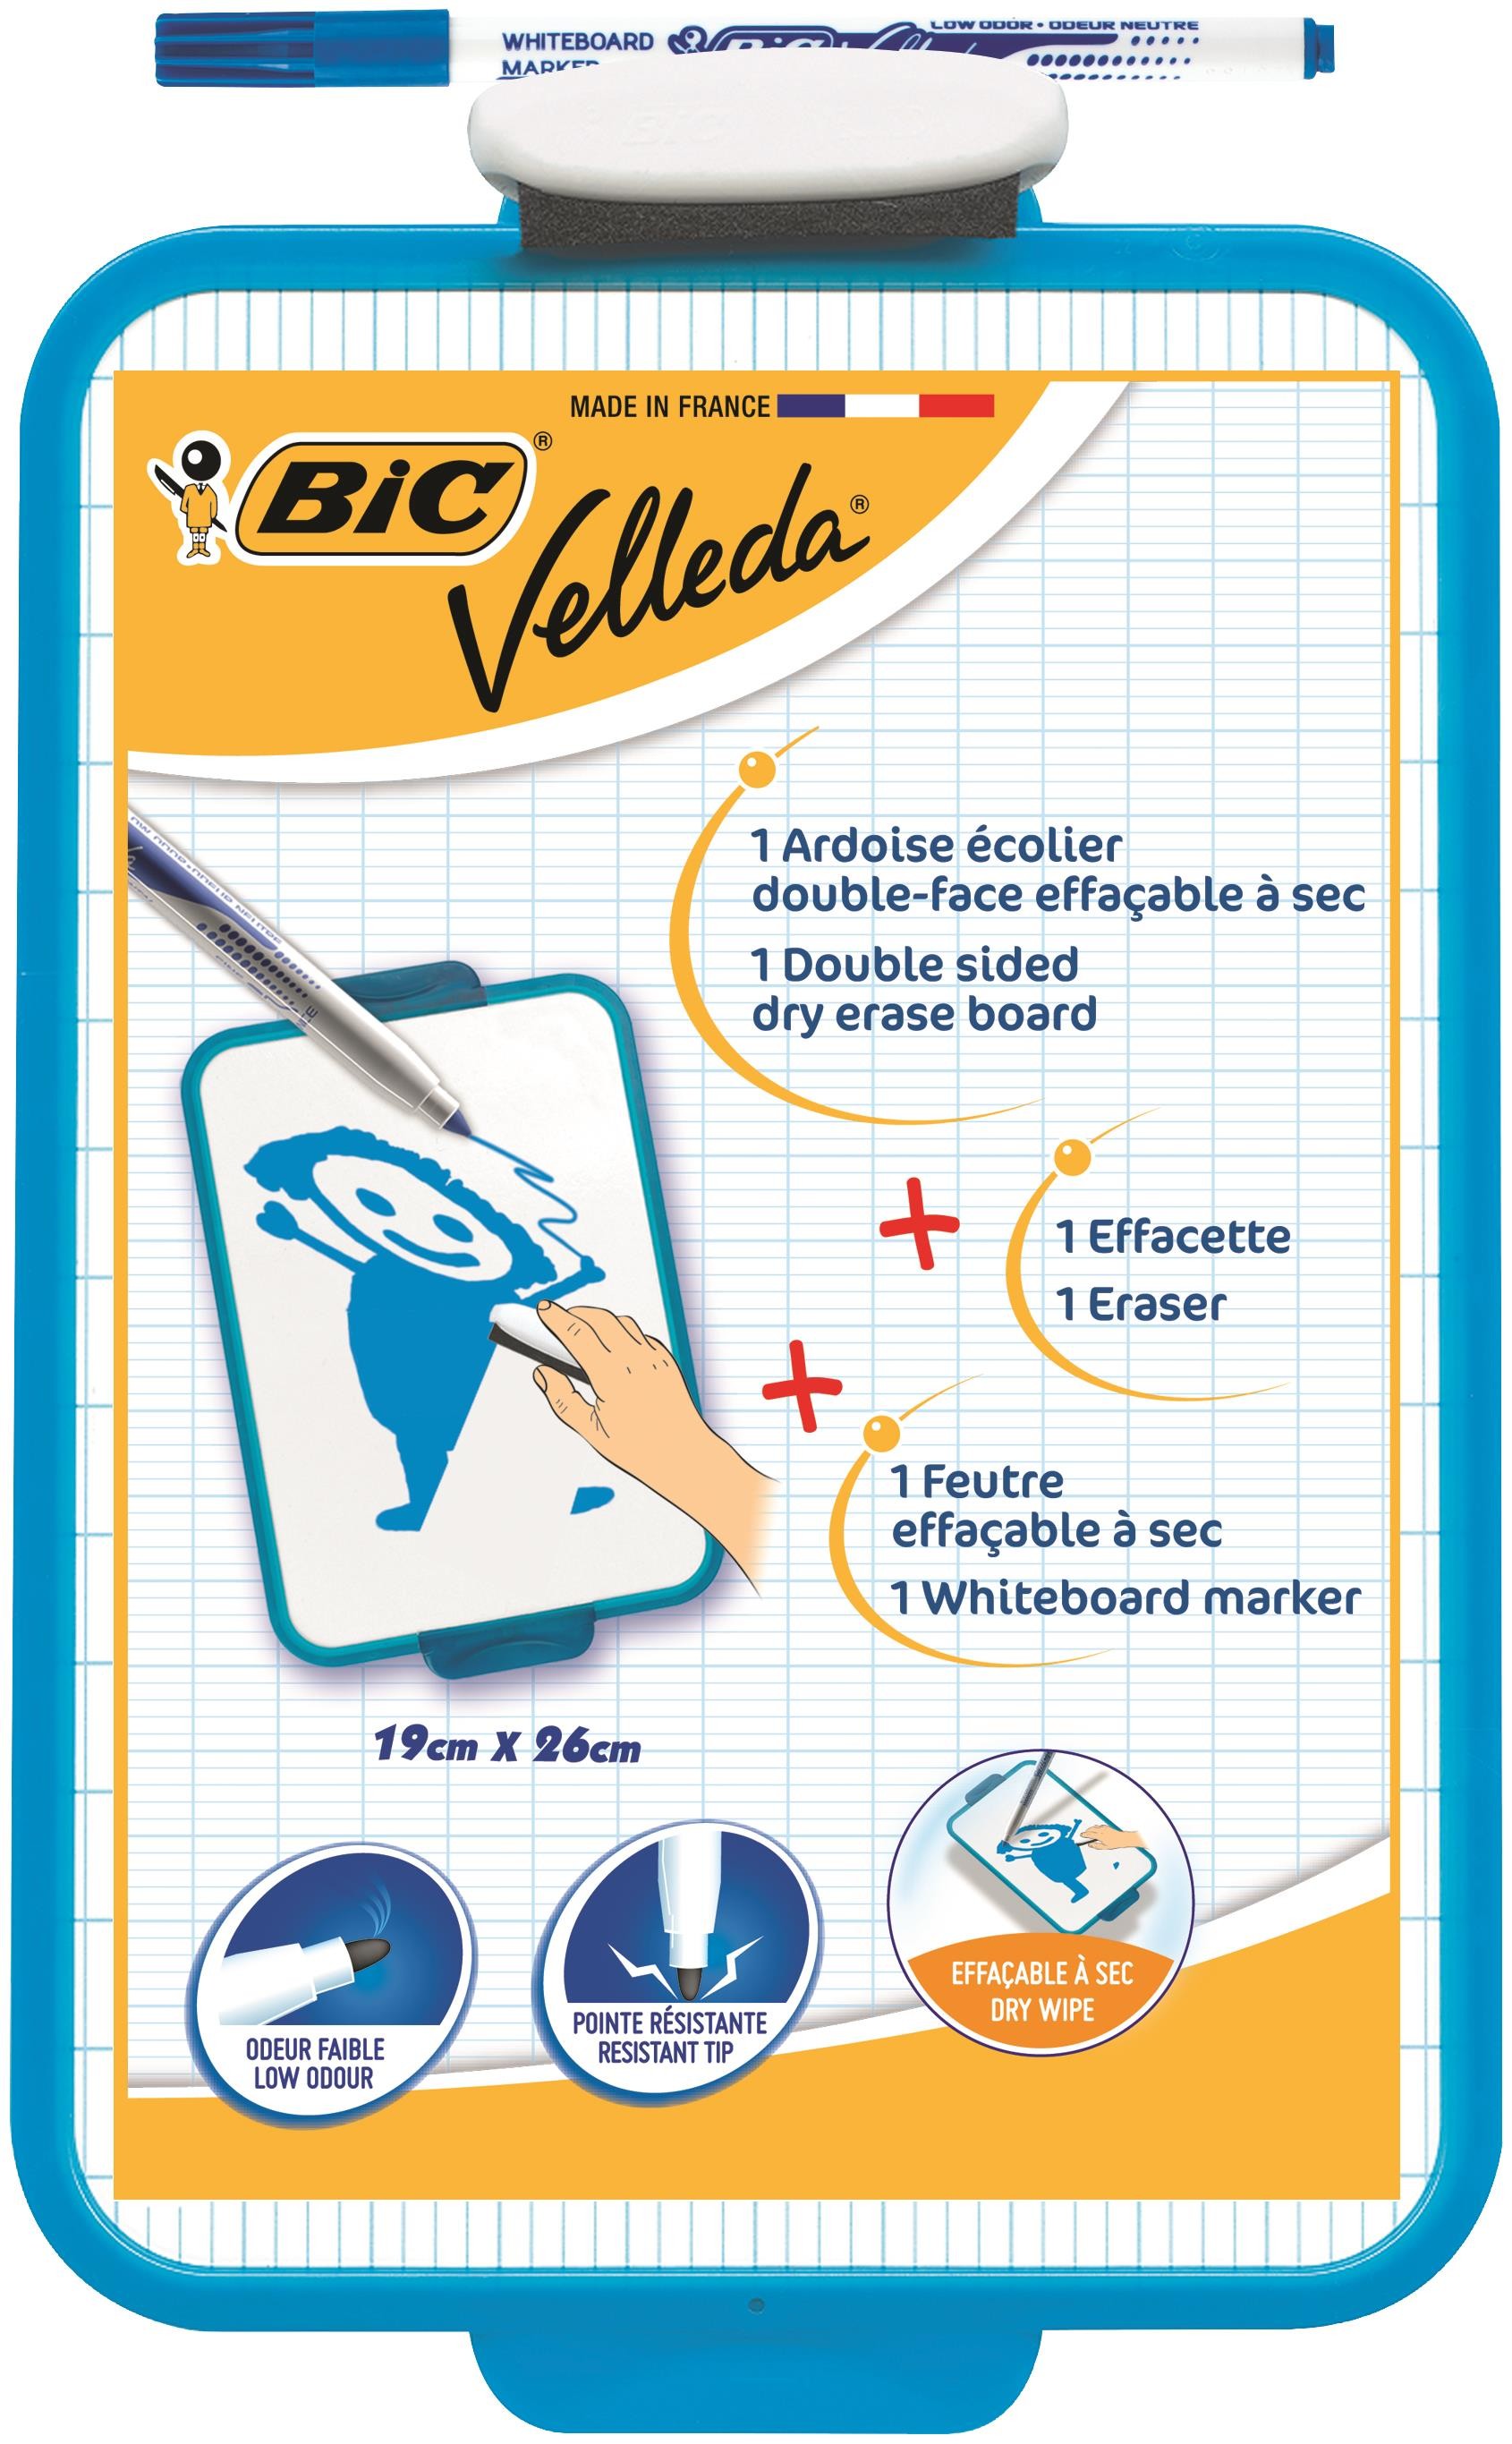 BIC Velleda Double-Sided Dry Erase Board (21 x 31 cm) with 8